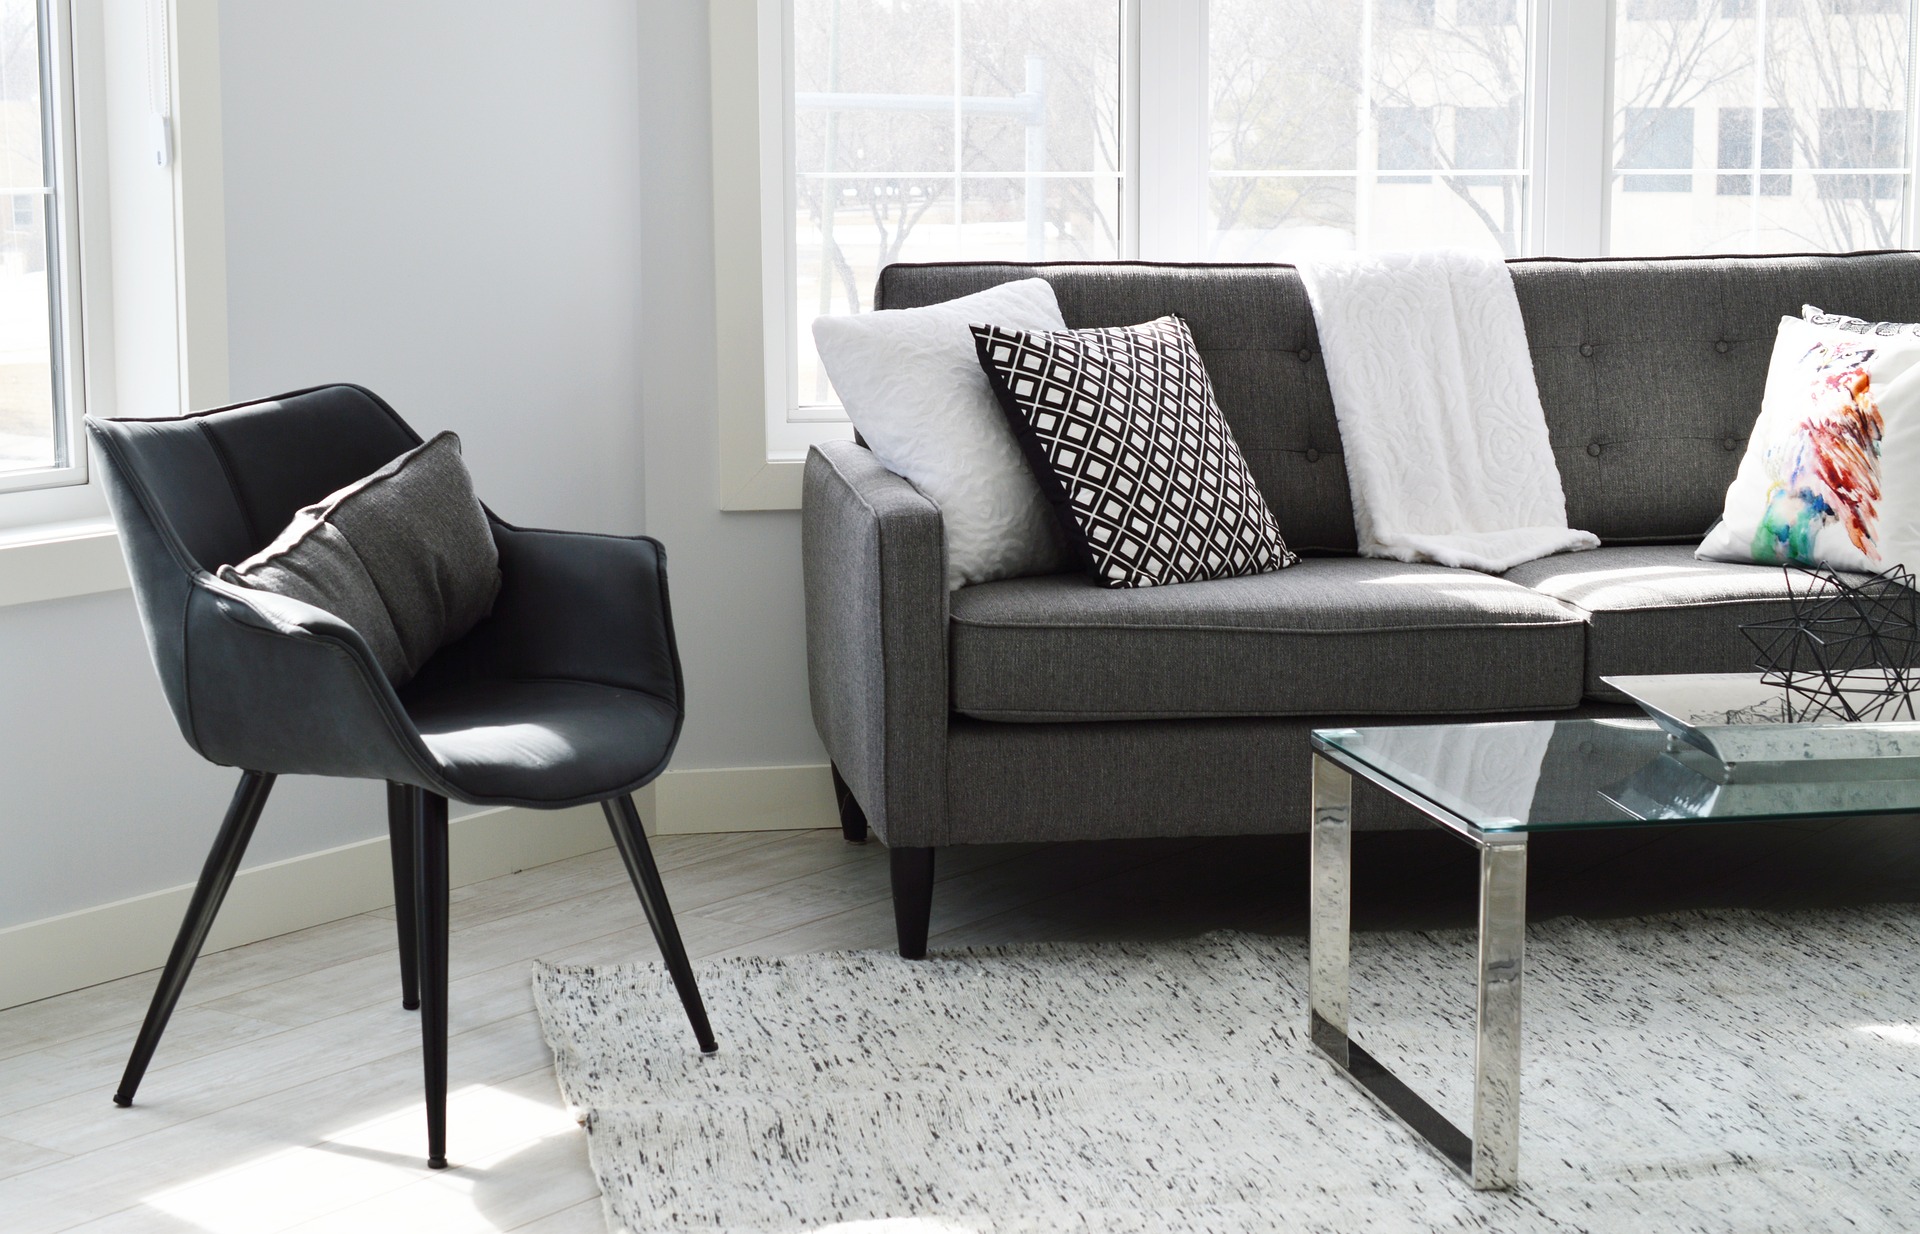 This Will Help You Pick The Right Furniture For Your New Home